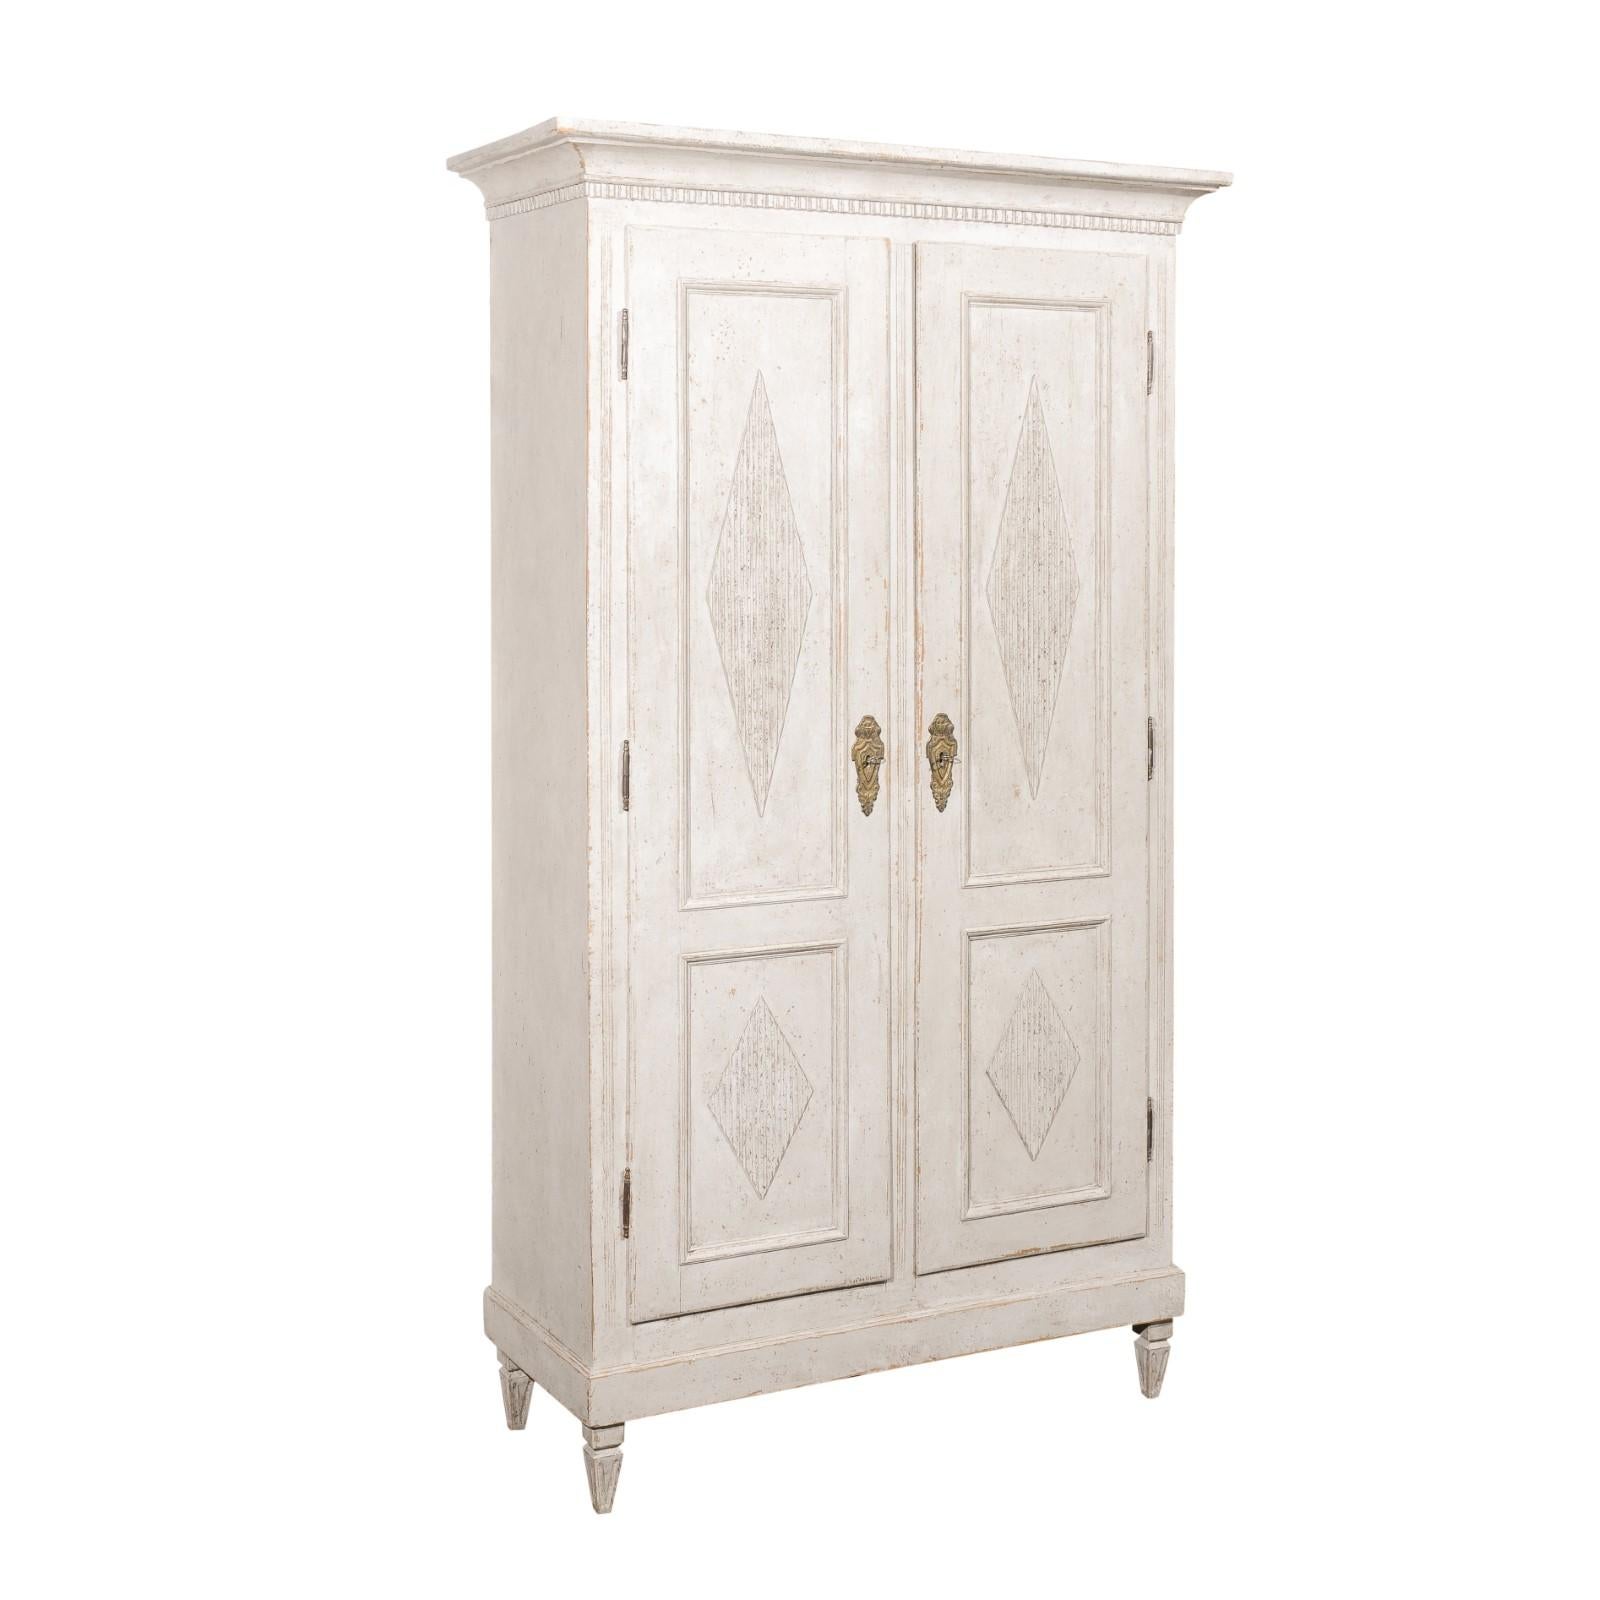 A Swedish Gustavian style painted wood linen cabinet from the late 19th century, with carved dentil molding and reeded diamond motifs. Created in Sweden during the last quarter of the 19th century, this painted wood cabinet features a curving